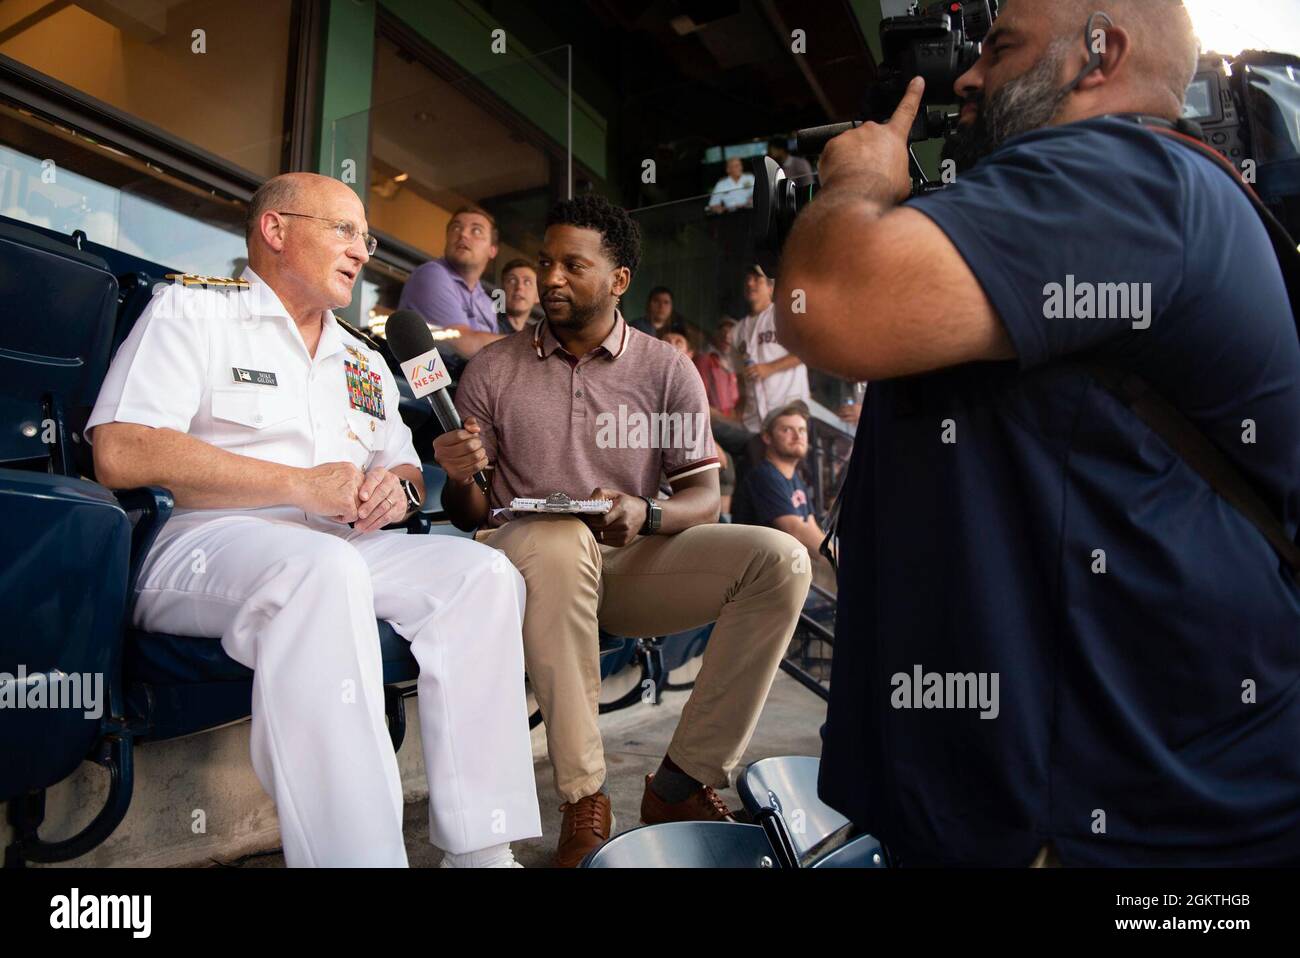 210629-N-BB269-1295 BOSTON (June 29, 2021) Chief of Naval Operations Adm. Mike Gilday speaks in an interview with Northeast Sports Network during a Red Sox baseball game at Fenway Park, Boston. Prior to the game, CNO administered the oath of enlistment to future U.S. Navy Sailors, Strike Fighter Squadron 213 (VFA-213) the Blacklions conducted a fly over, a Navy Band D.C. vocalist sang the national anthem, and the USS Constitution color guard paraded the colors in front of the audience. Stock Photo